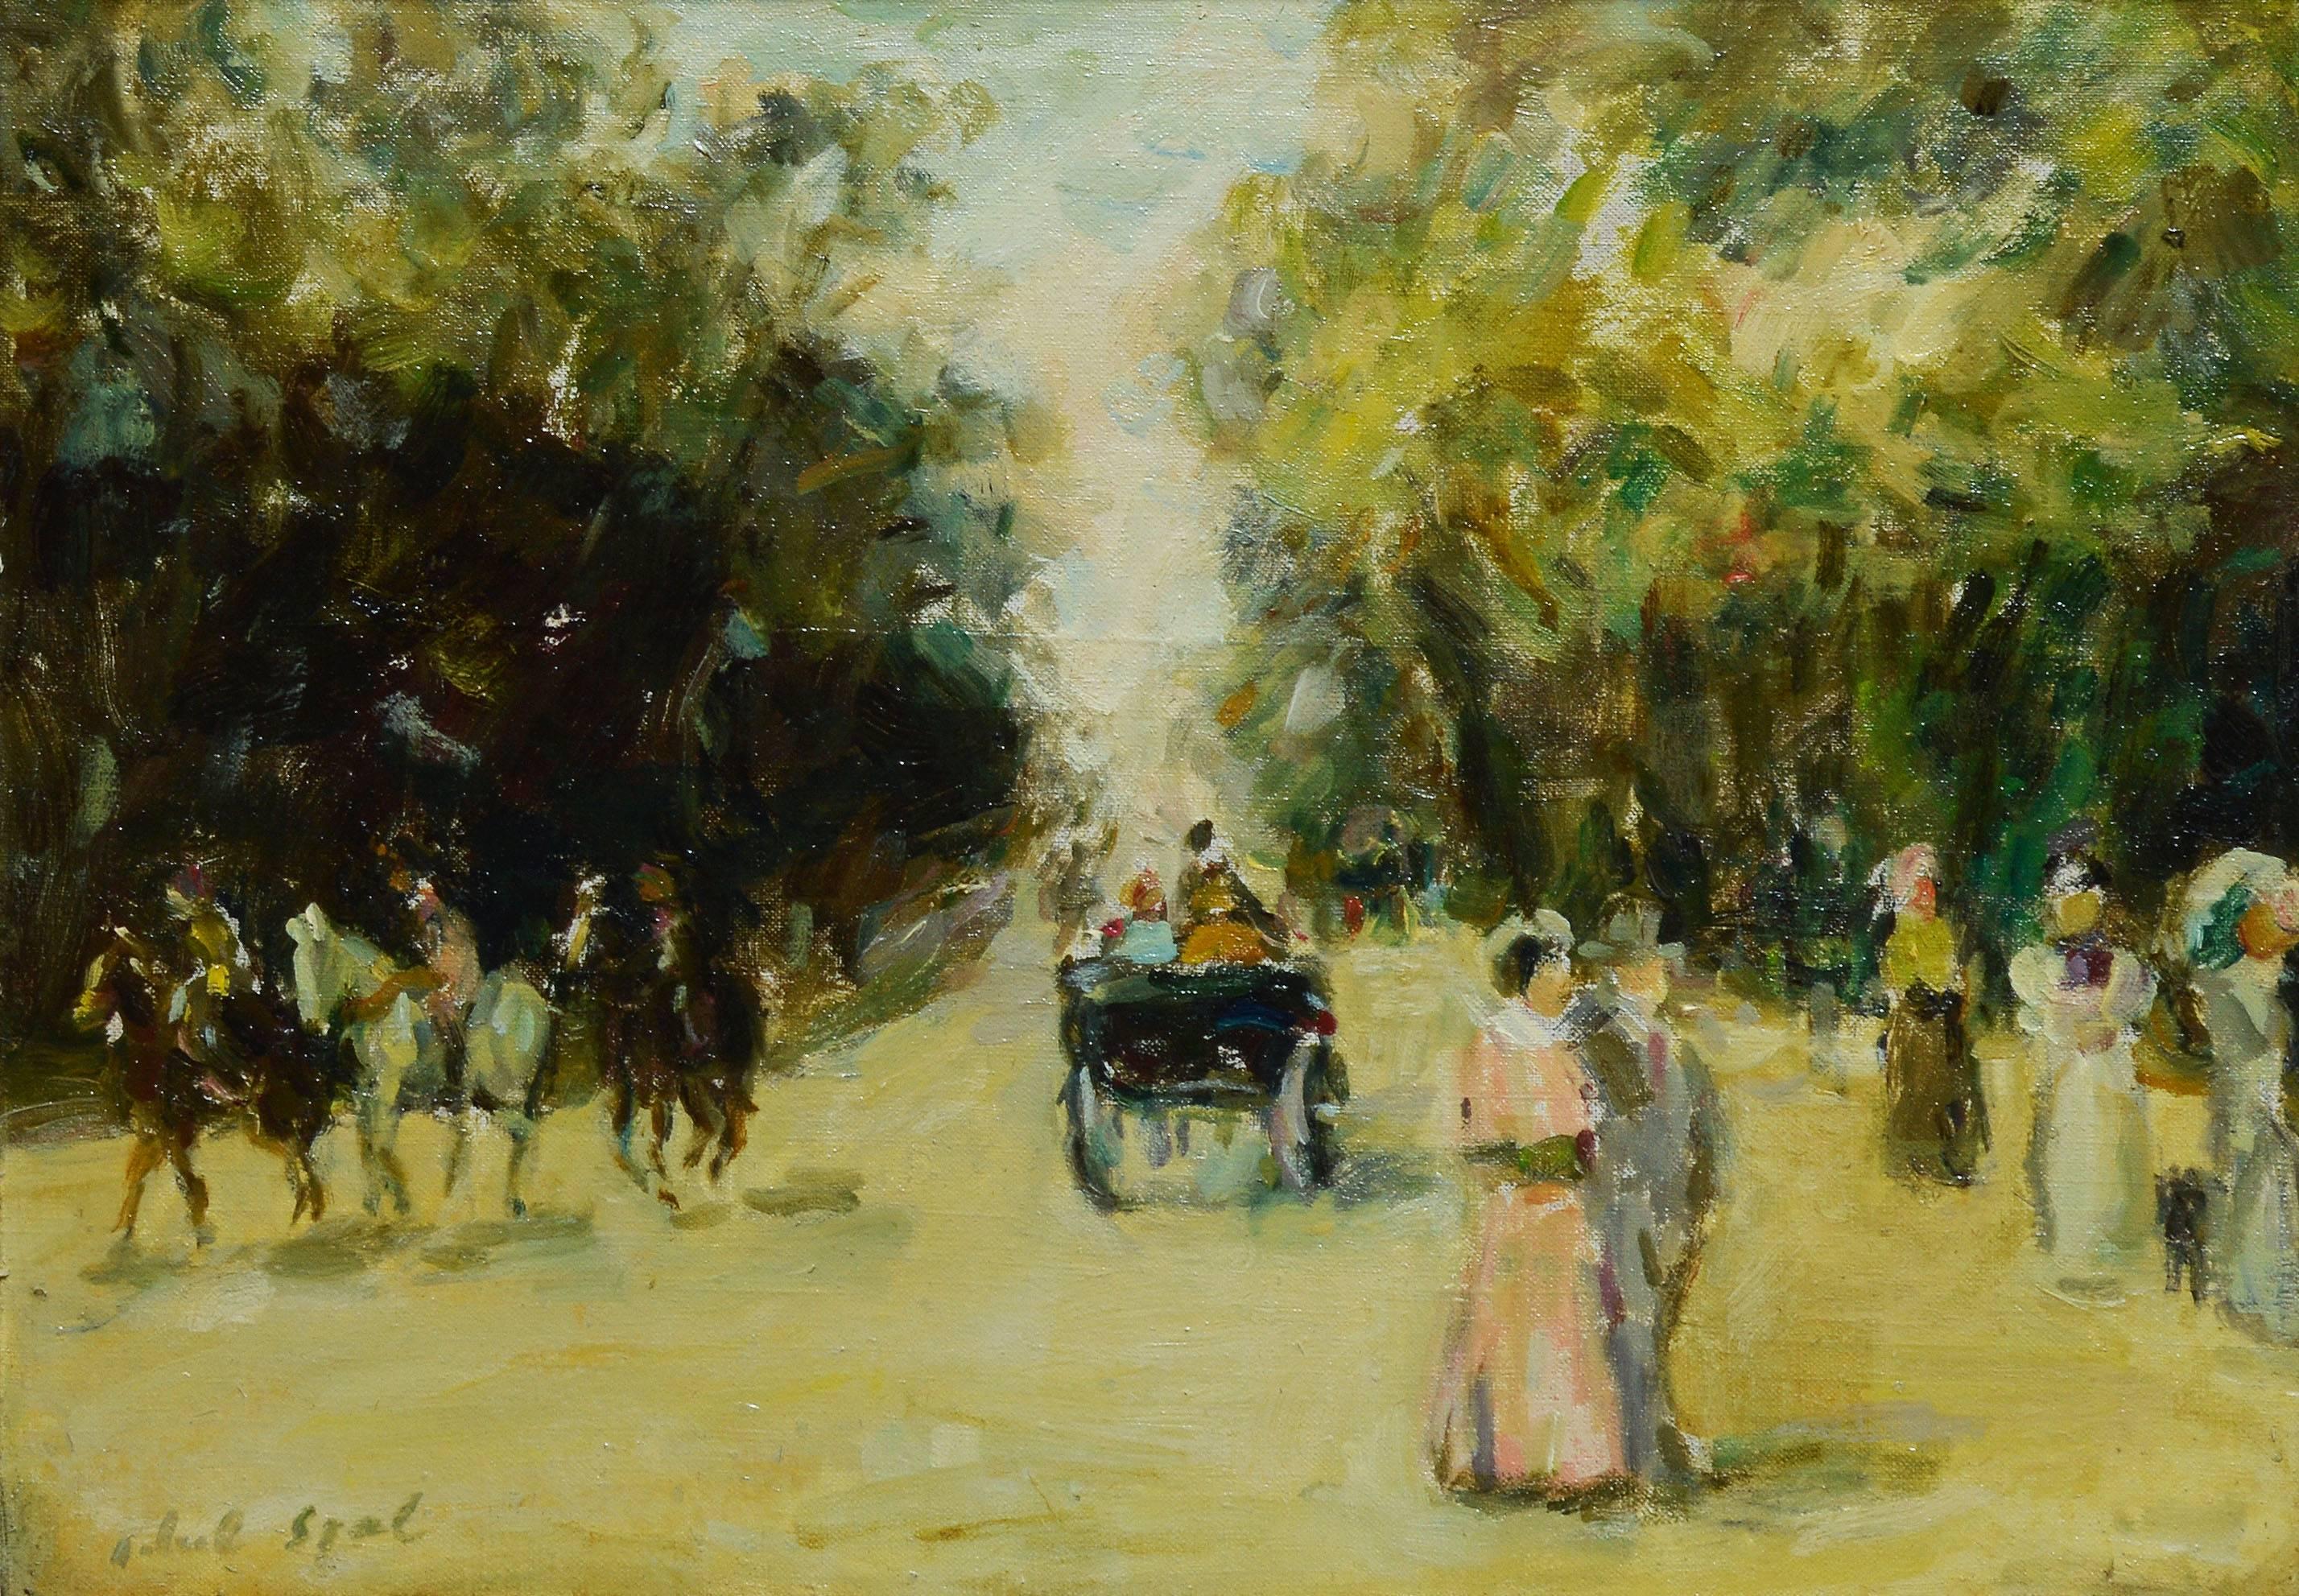 Paris Park View with Horses and Figures - Impressionist Painting by Gabriel Spat